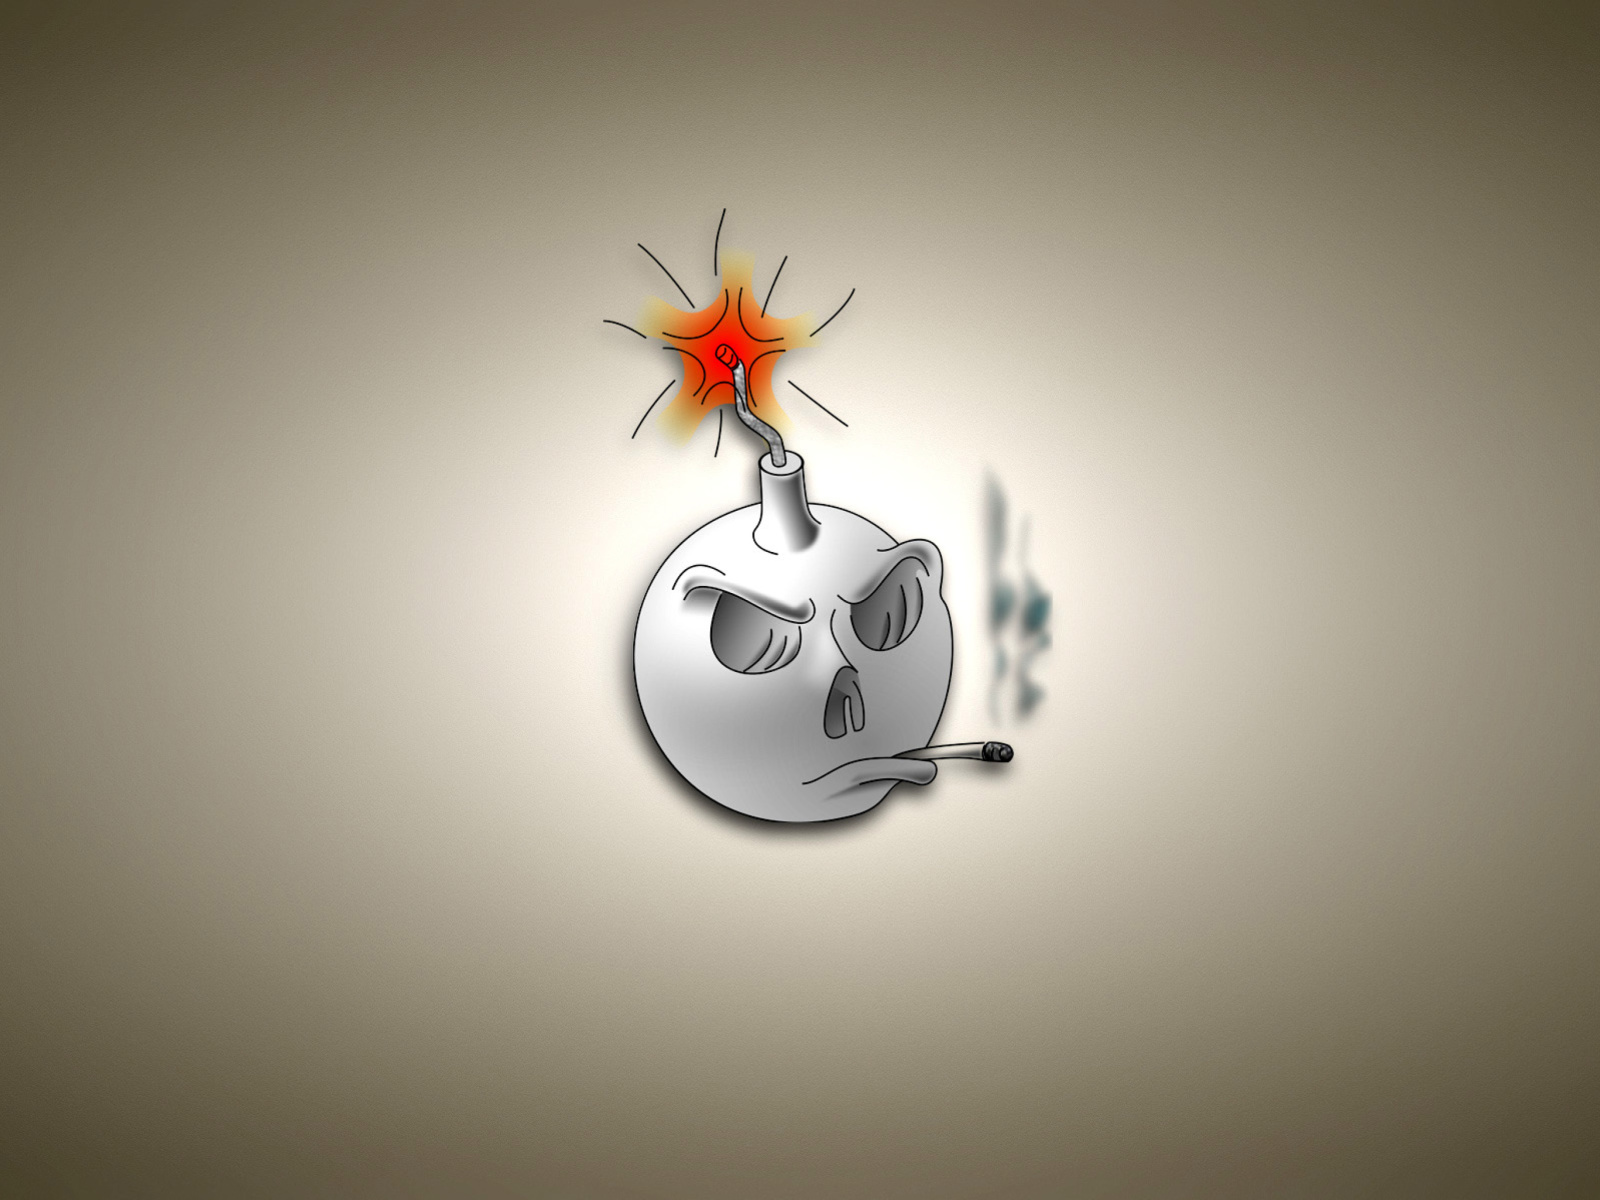 Bomb with Wick wallpaper 1600x1200